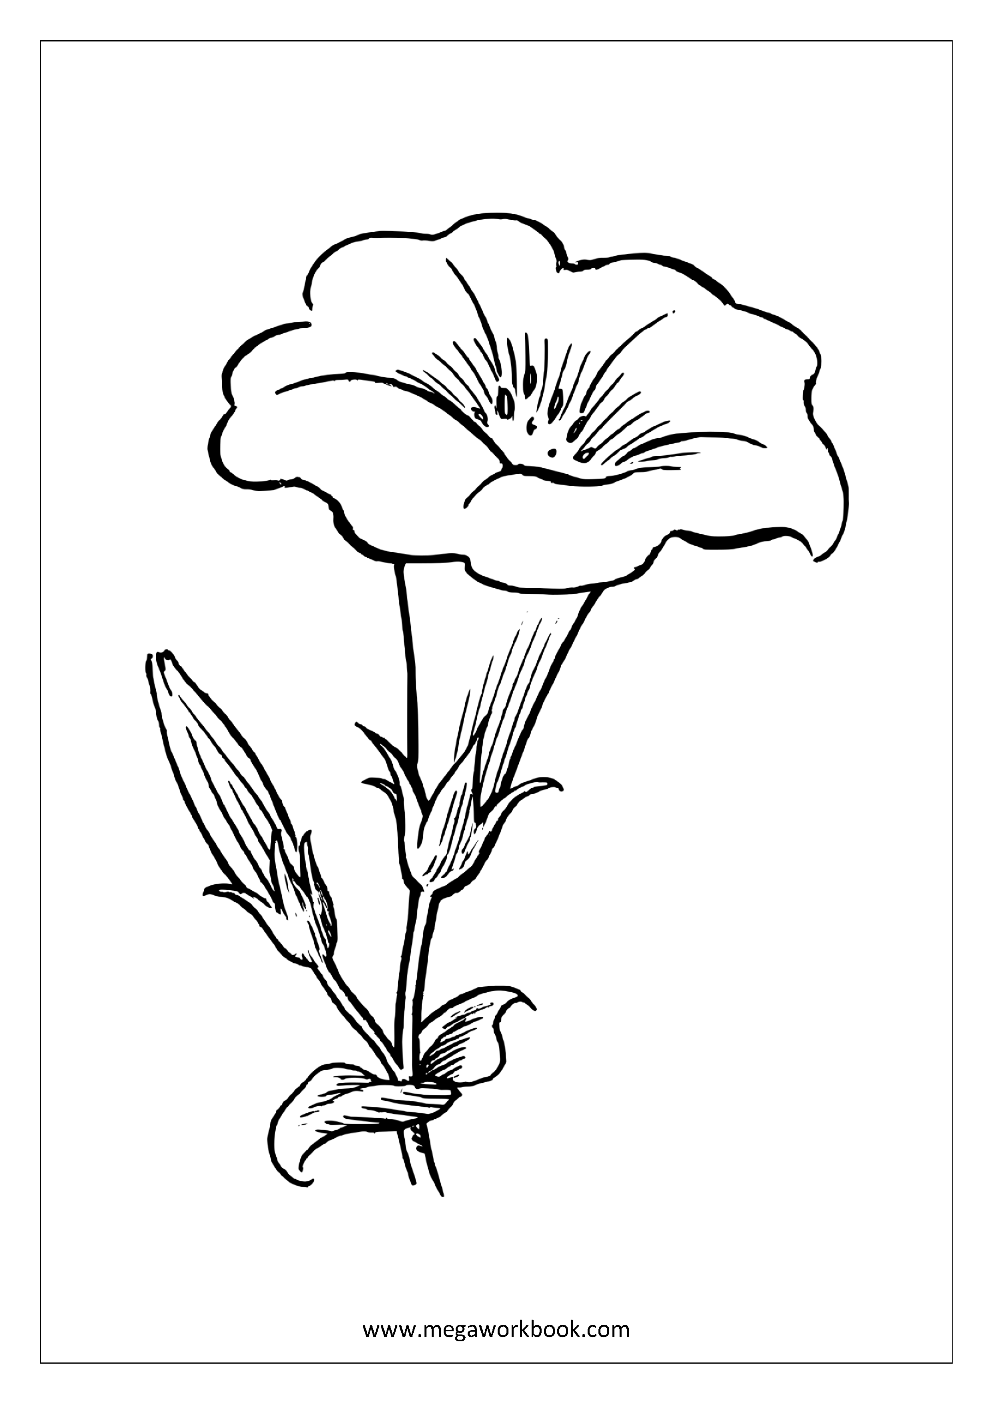 Flower Coloring Pages - Plant & Tree Coloring Pages - Leaf Coloring ...